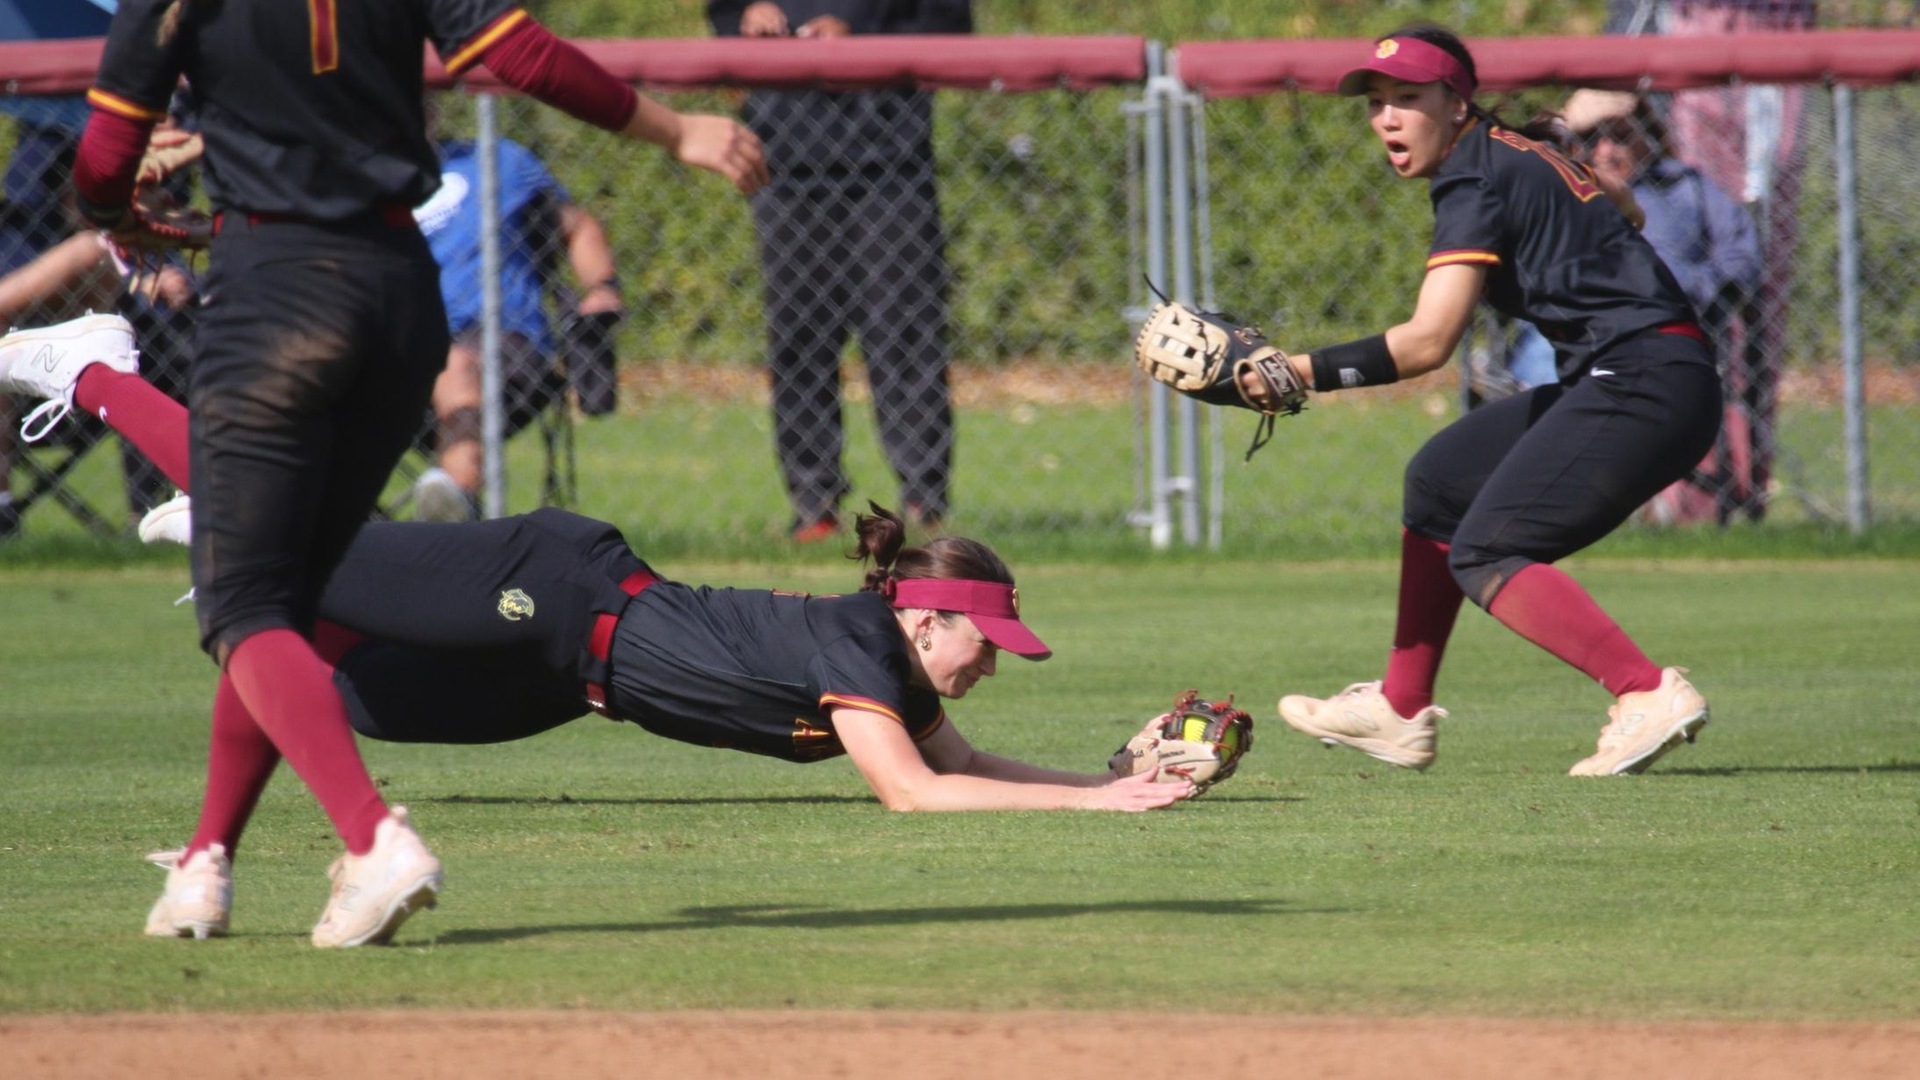 Paige Zimmerman saves a run with a diving catch in center (photo by Eva Fernandez)